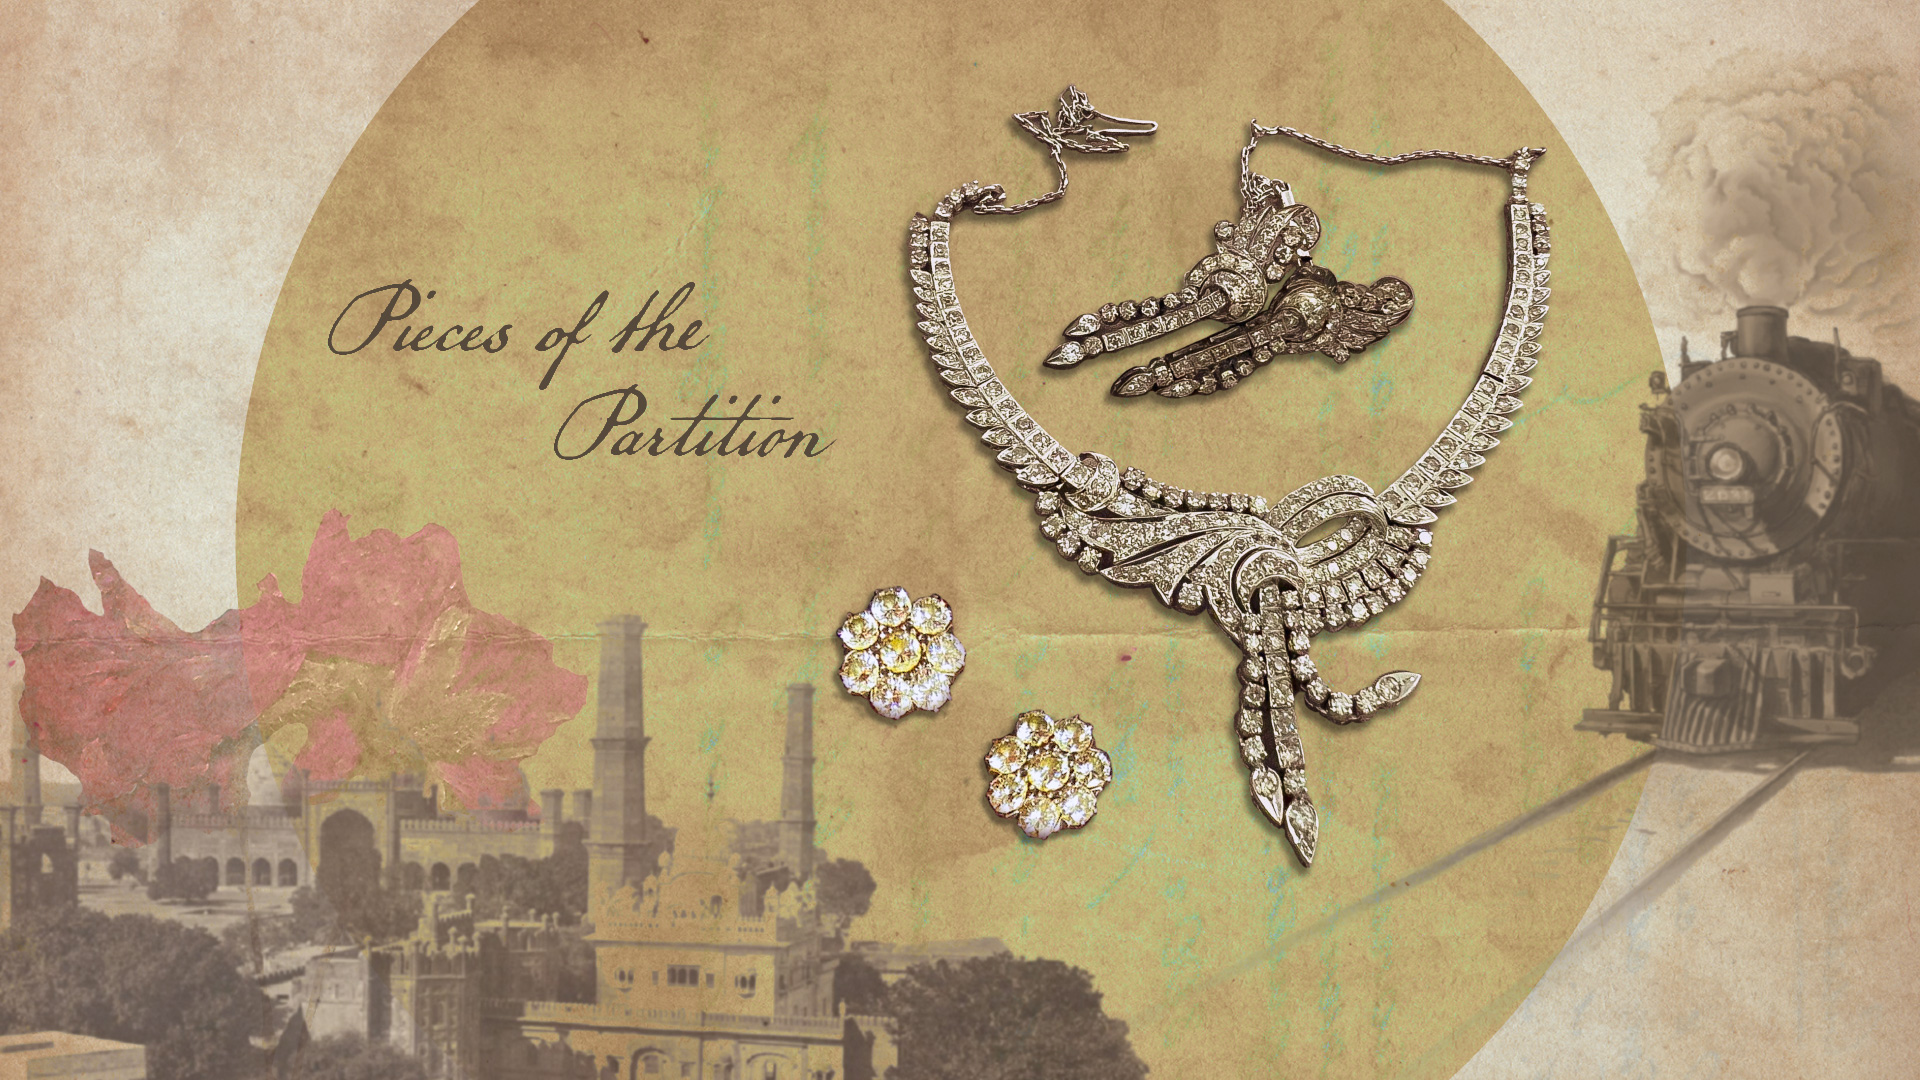 The diamond heirlooms during the Partition